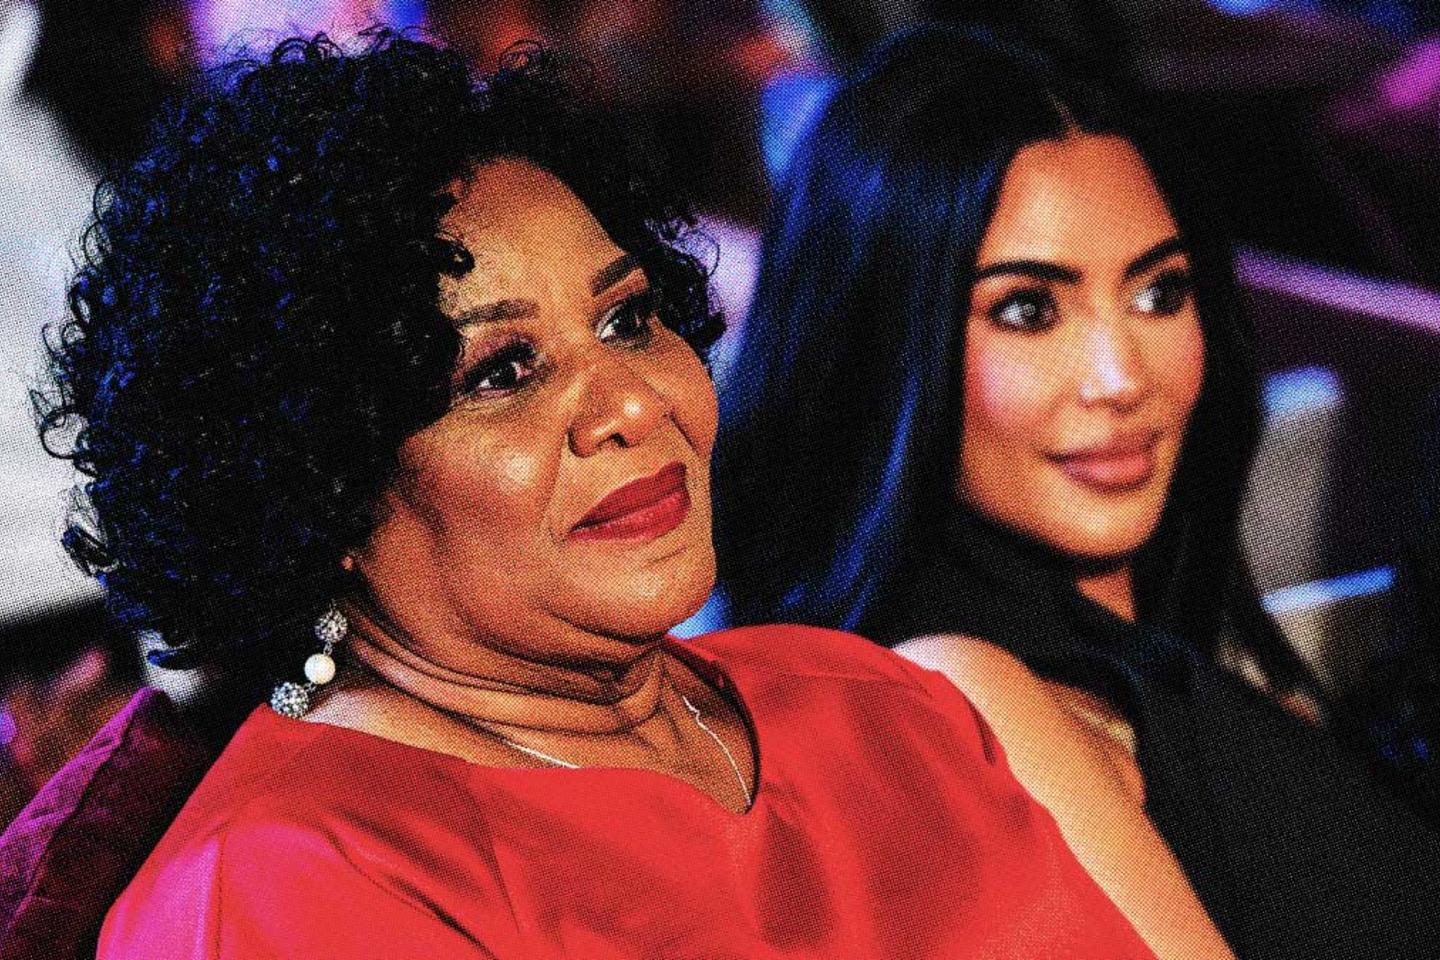 Alice Marie Johnson and Kim Kardashian seated next to each other